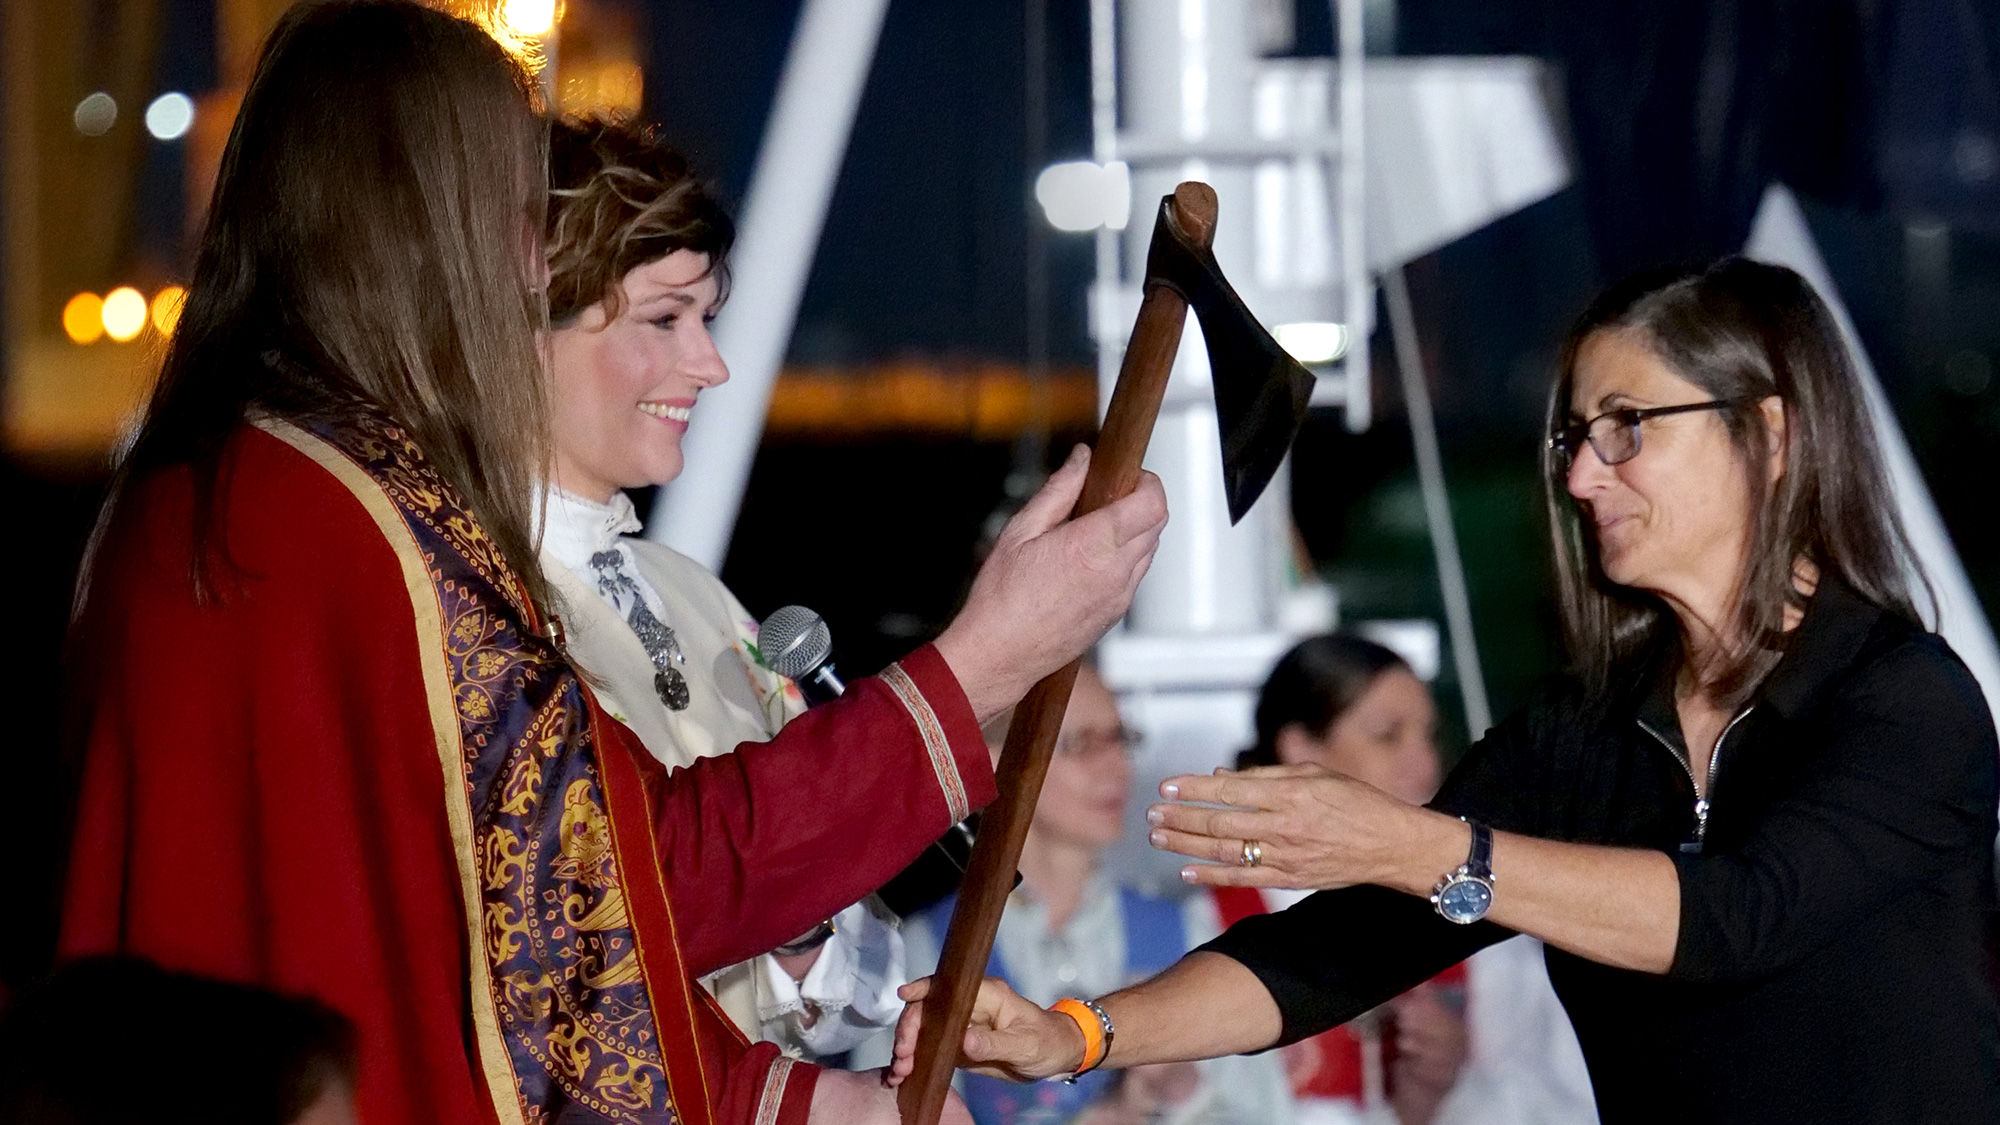 Viking Neptune godmother Nicole Stott (right) was presented a Viking broad axe to cut the ribbon to send a bottle of Norwegian crashing into the ship’s hull.